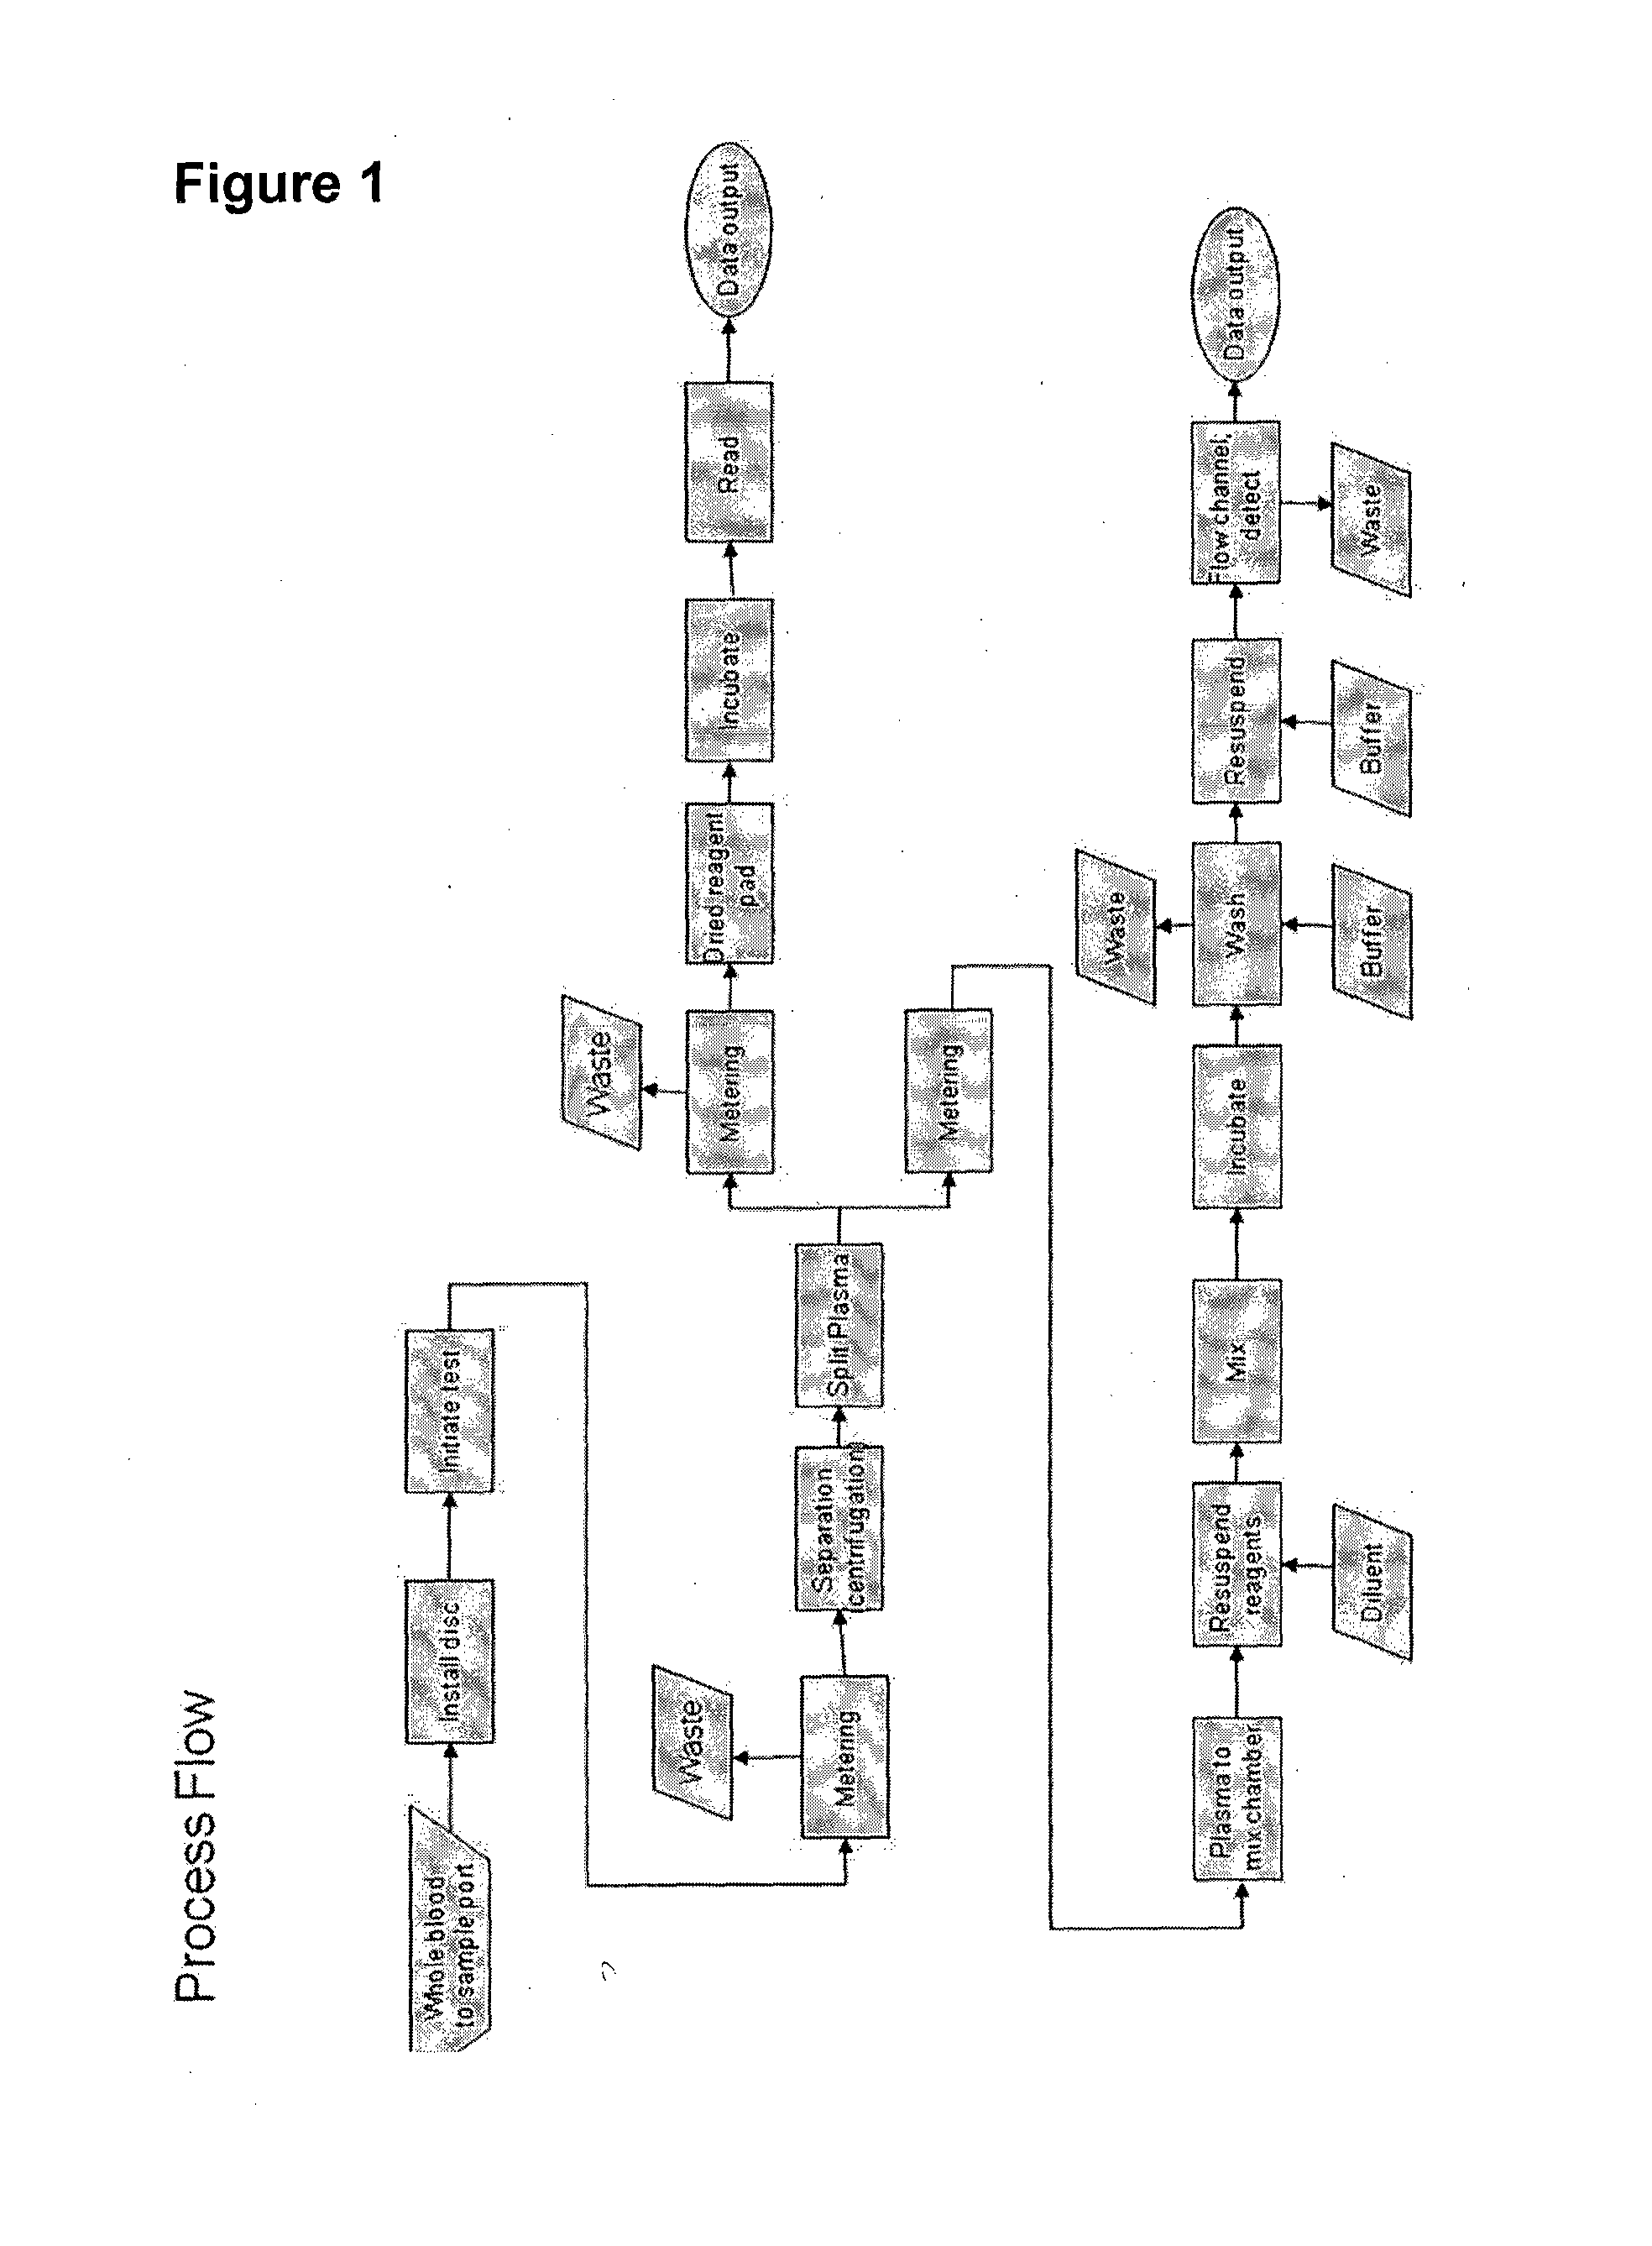 Microfluidic Disc For Use In With Bead-Based Immunoassays